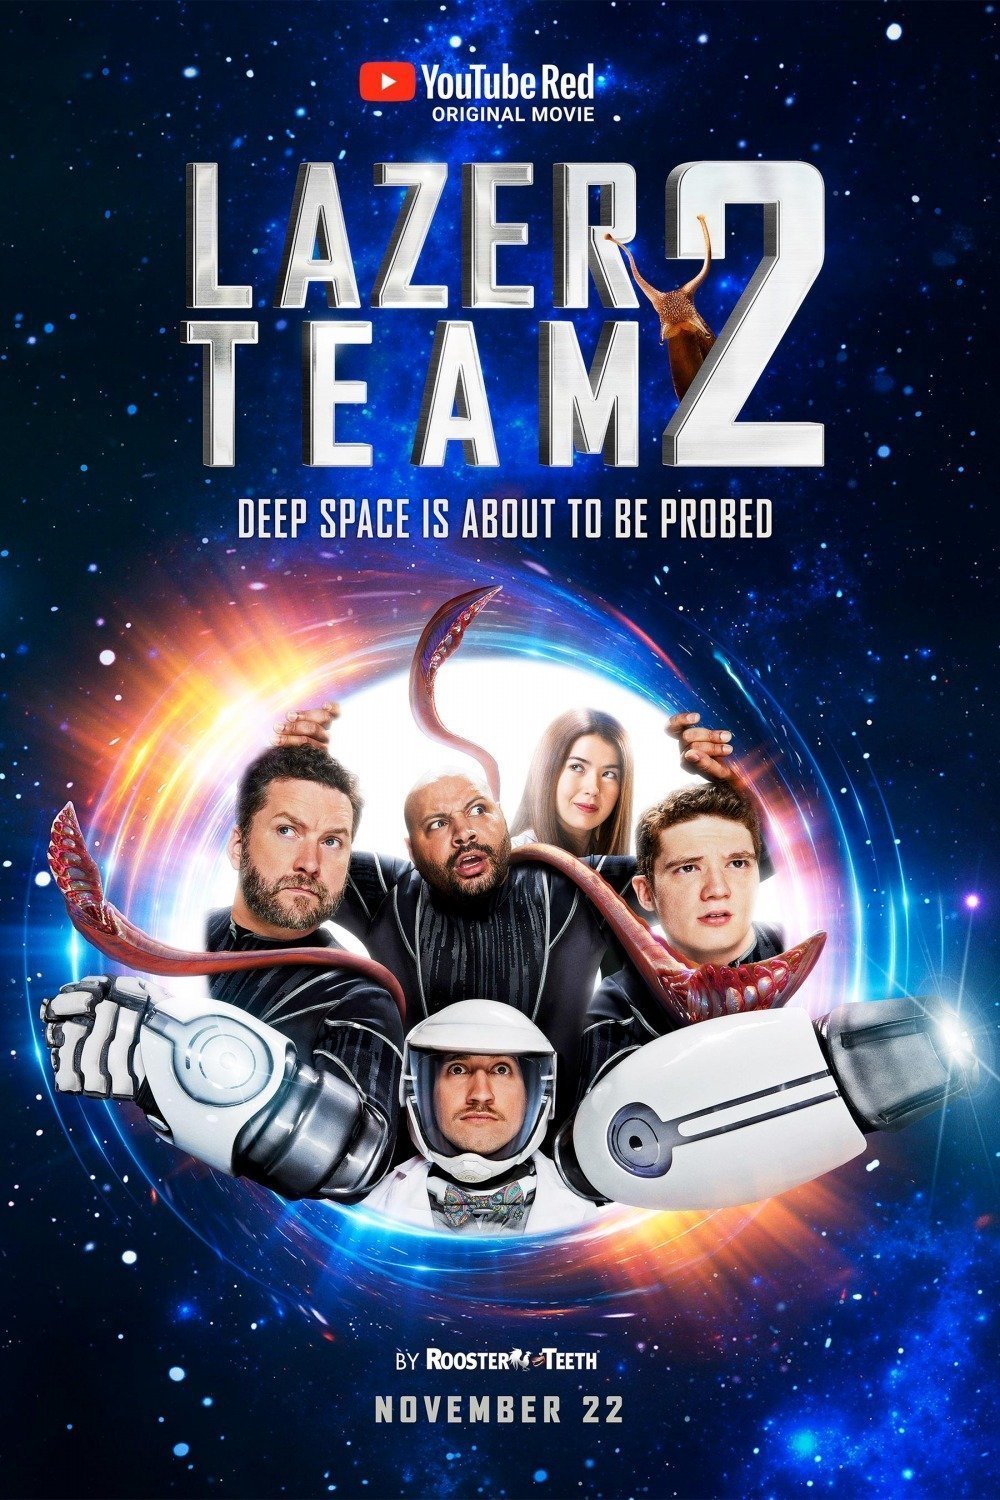 Poster of the movie Lazer Team 2